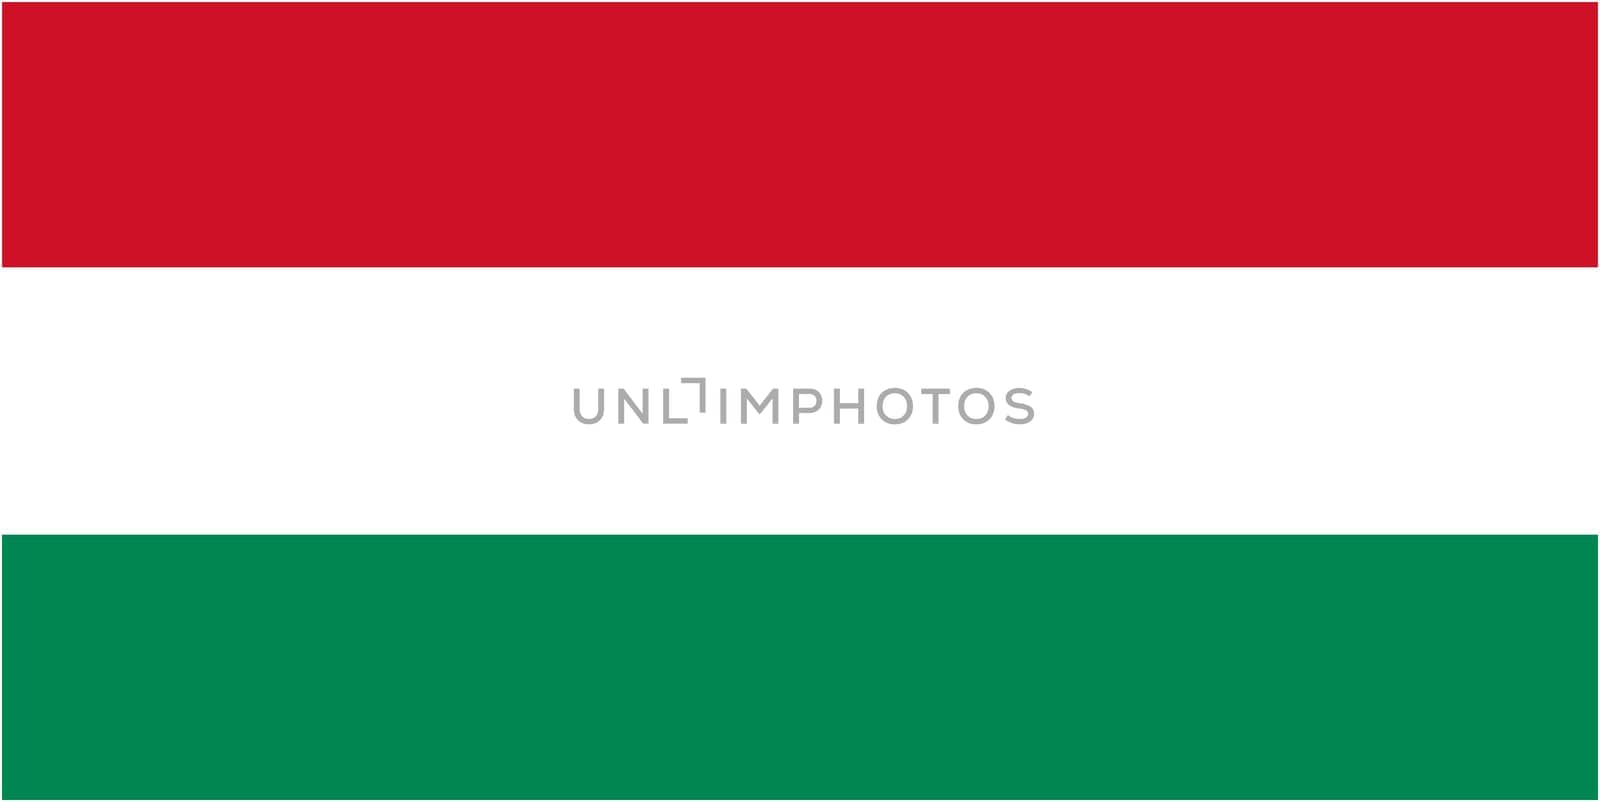 Hungary flag by paolo77